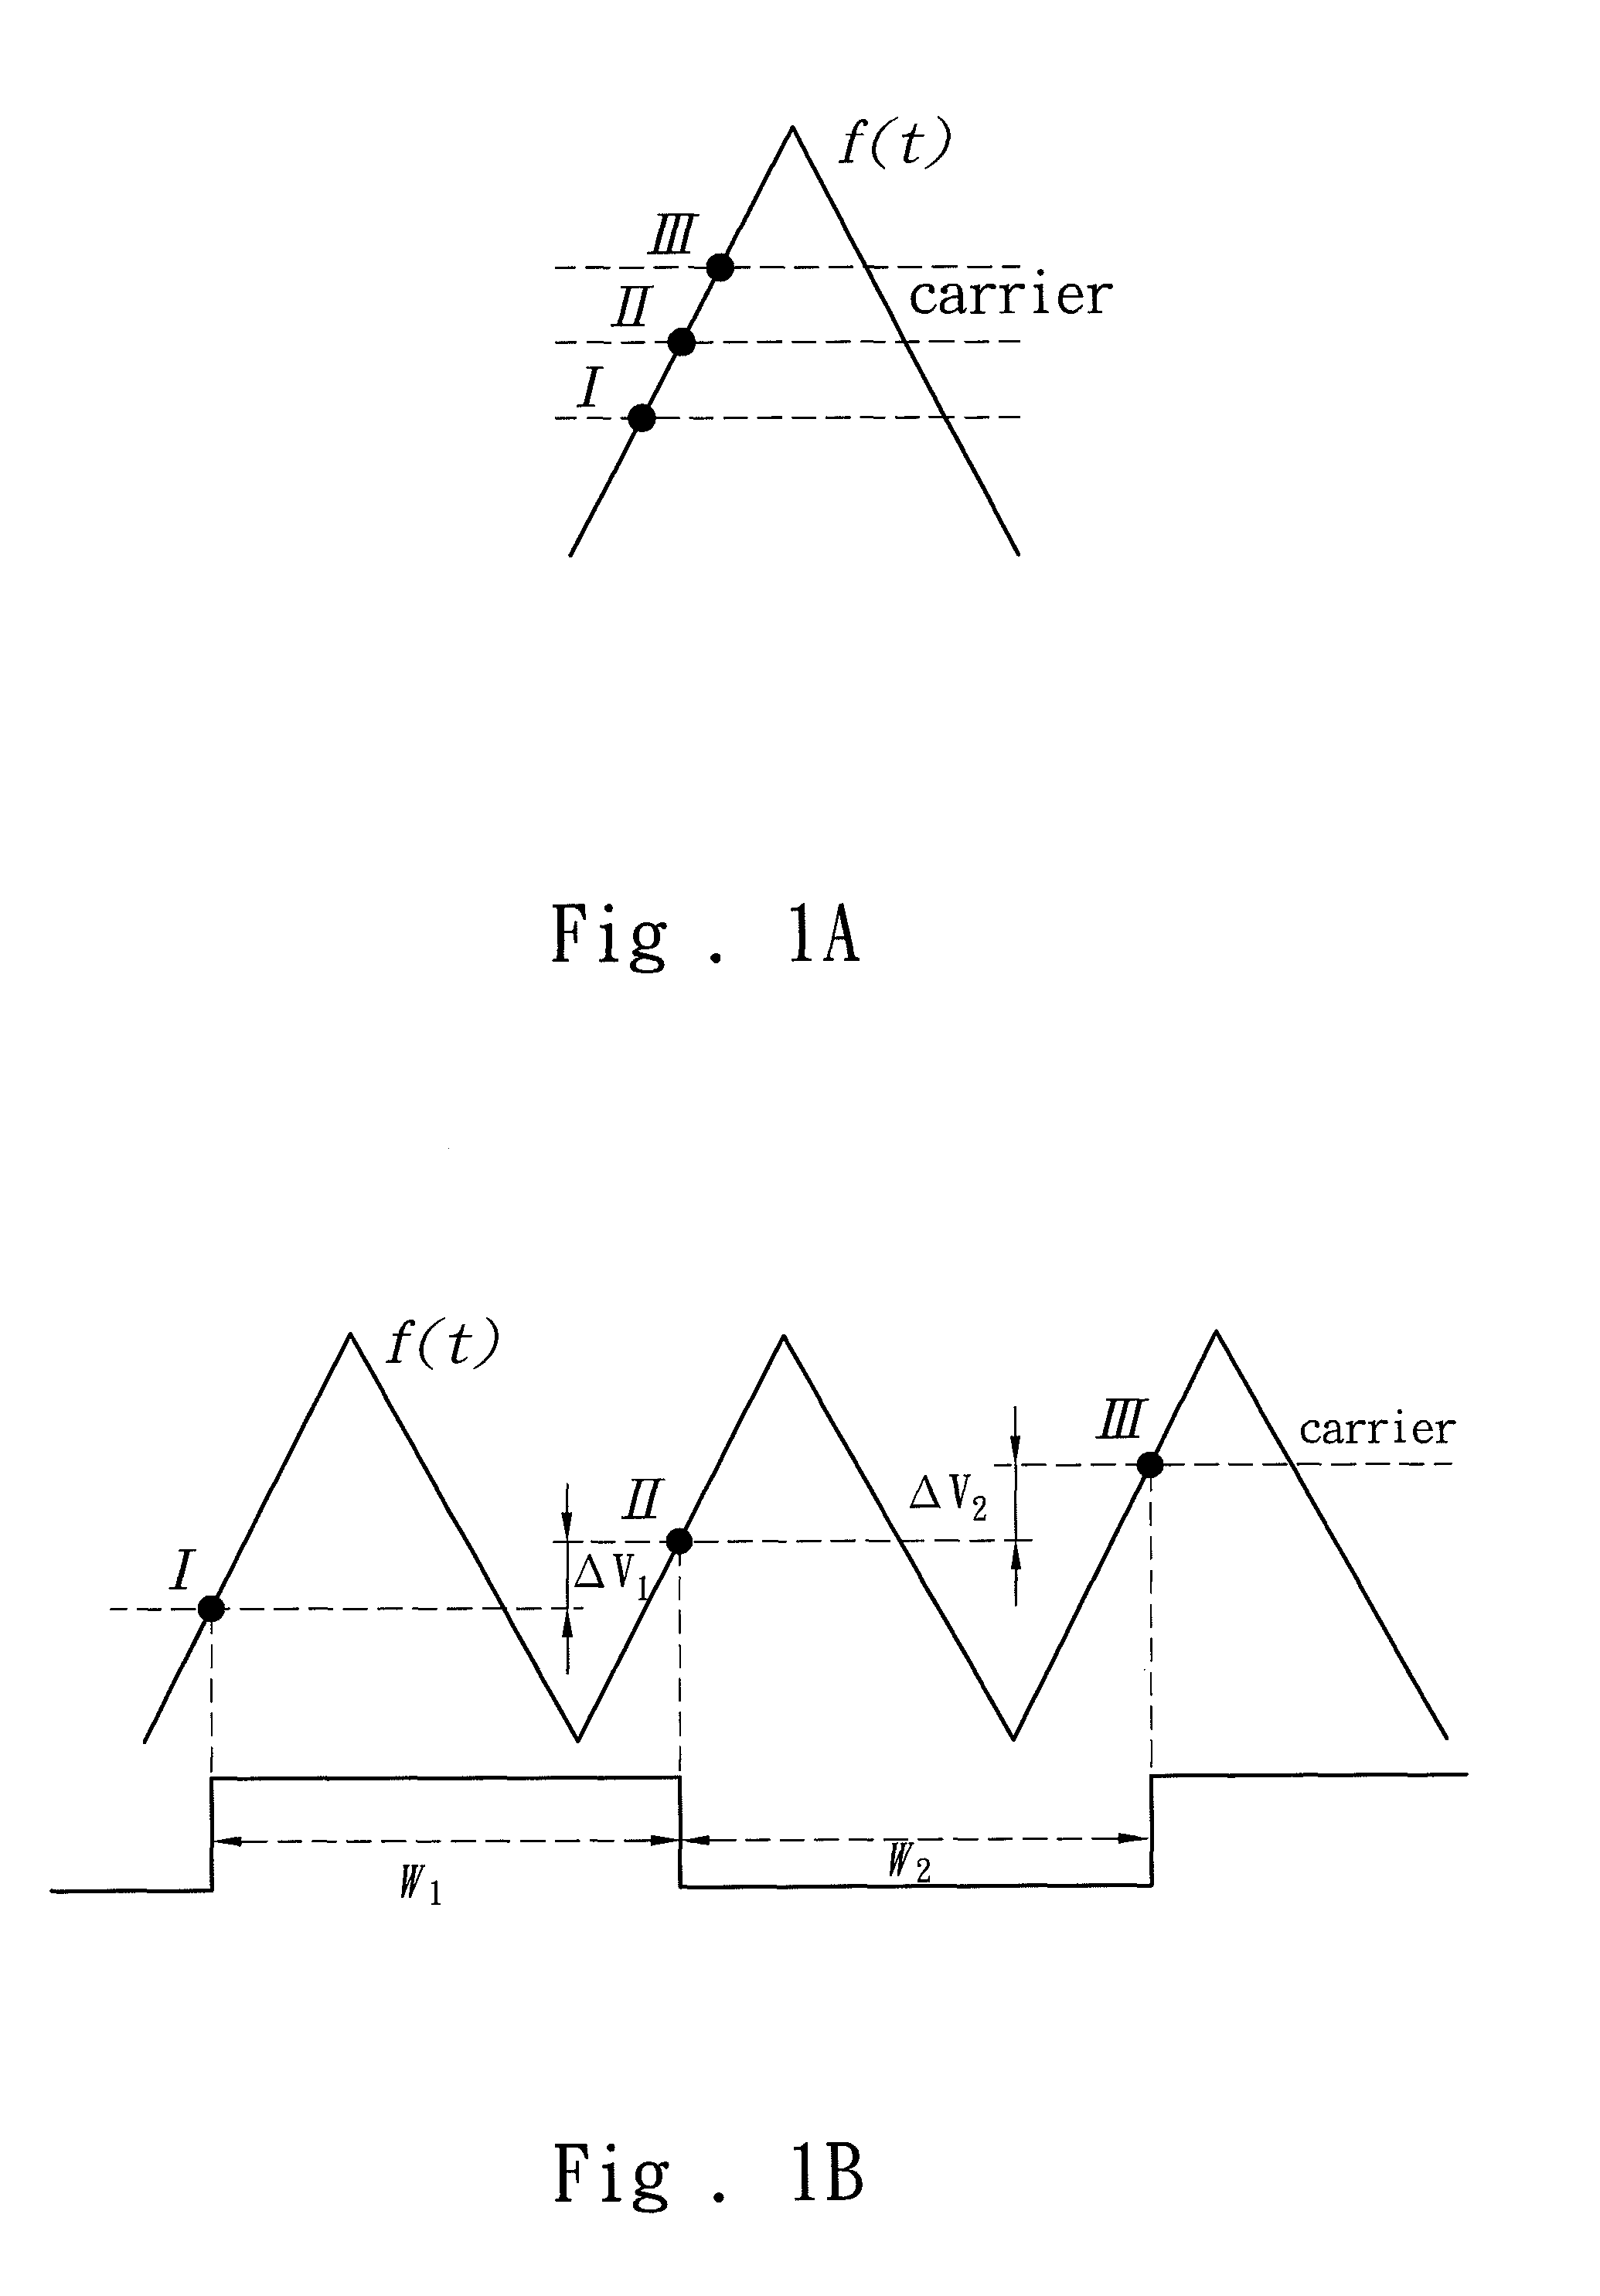 Method for testing a high-speed digital to analog converter based on an undersampling technique